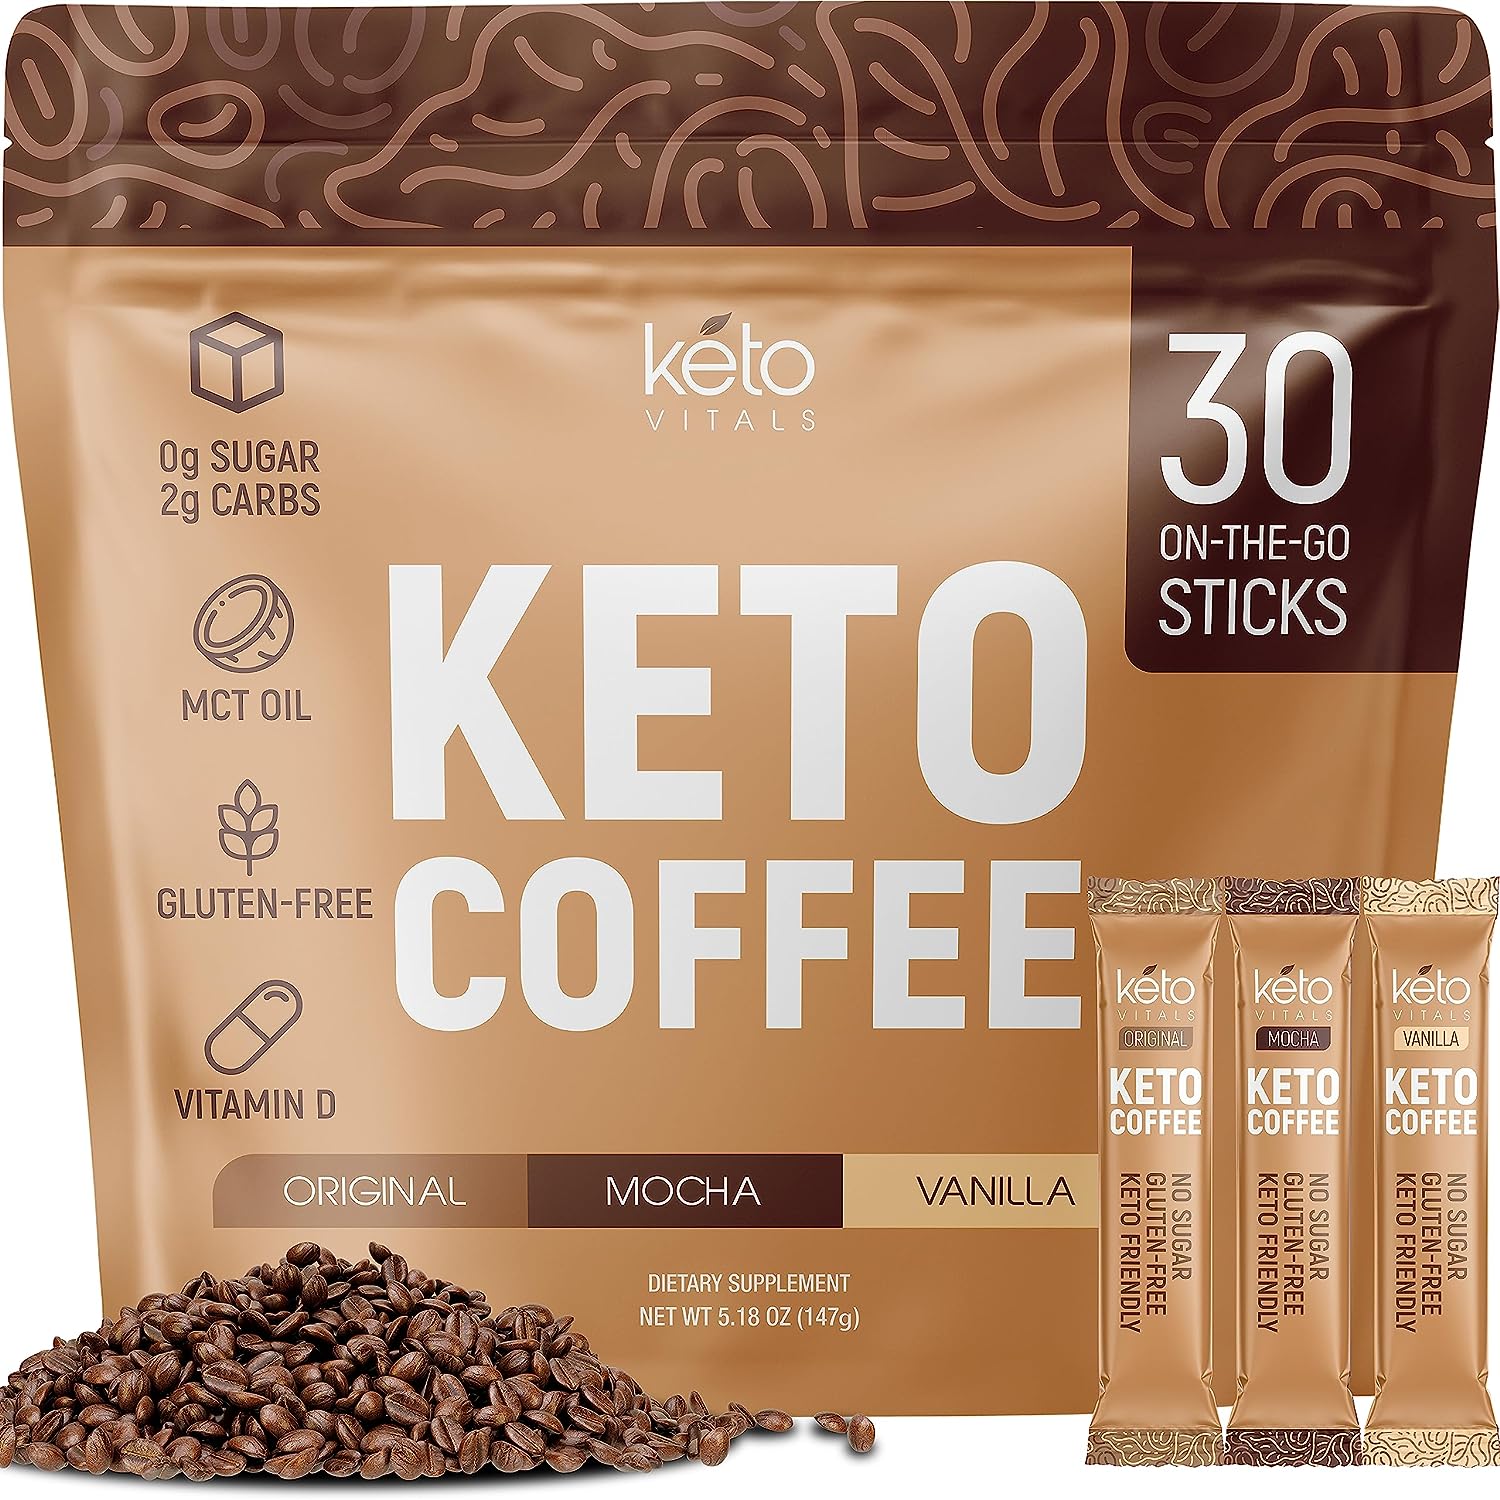 Keto Vitals Instant Keto Coffee Powder - Low-Calorie Sweetened Instant Coffee Packets, Single Serve - Keto Coffee Instant Mix in Original, Vanilla, & Mocha Flavors - 30 Count